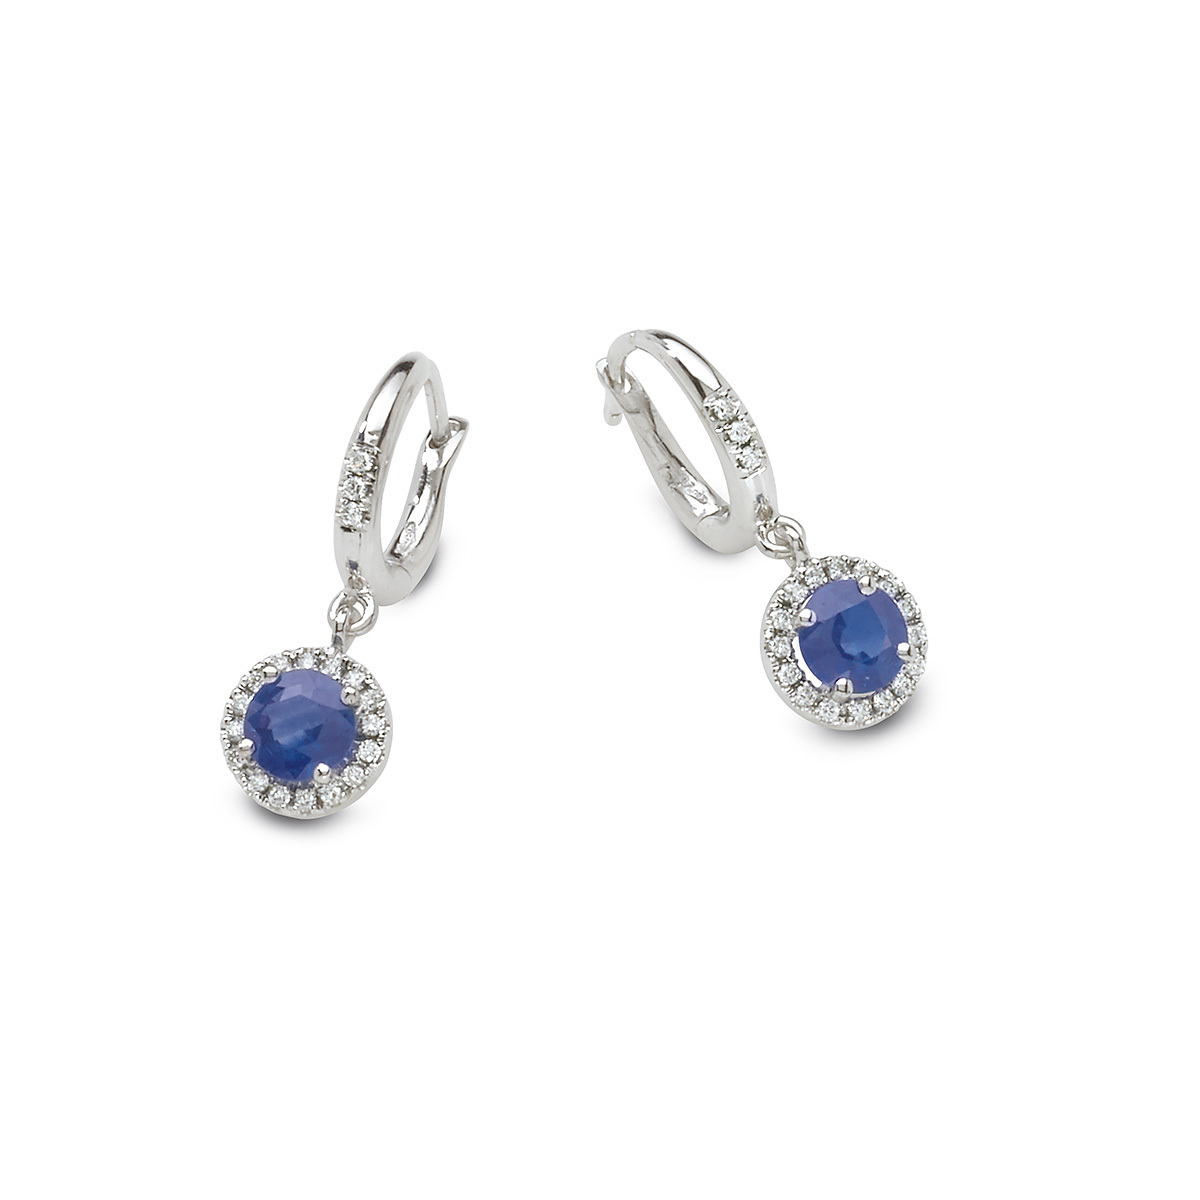 Exel collection jewels earrings blue sapphire